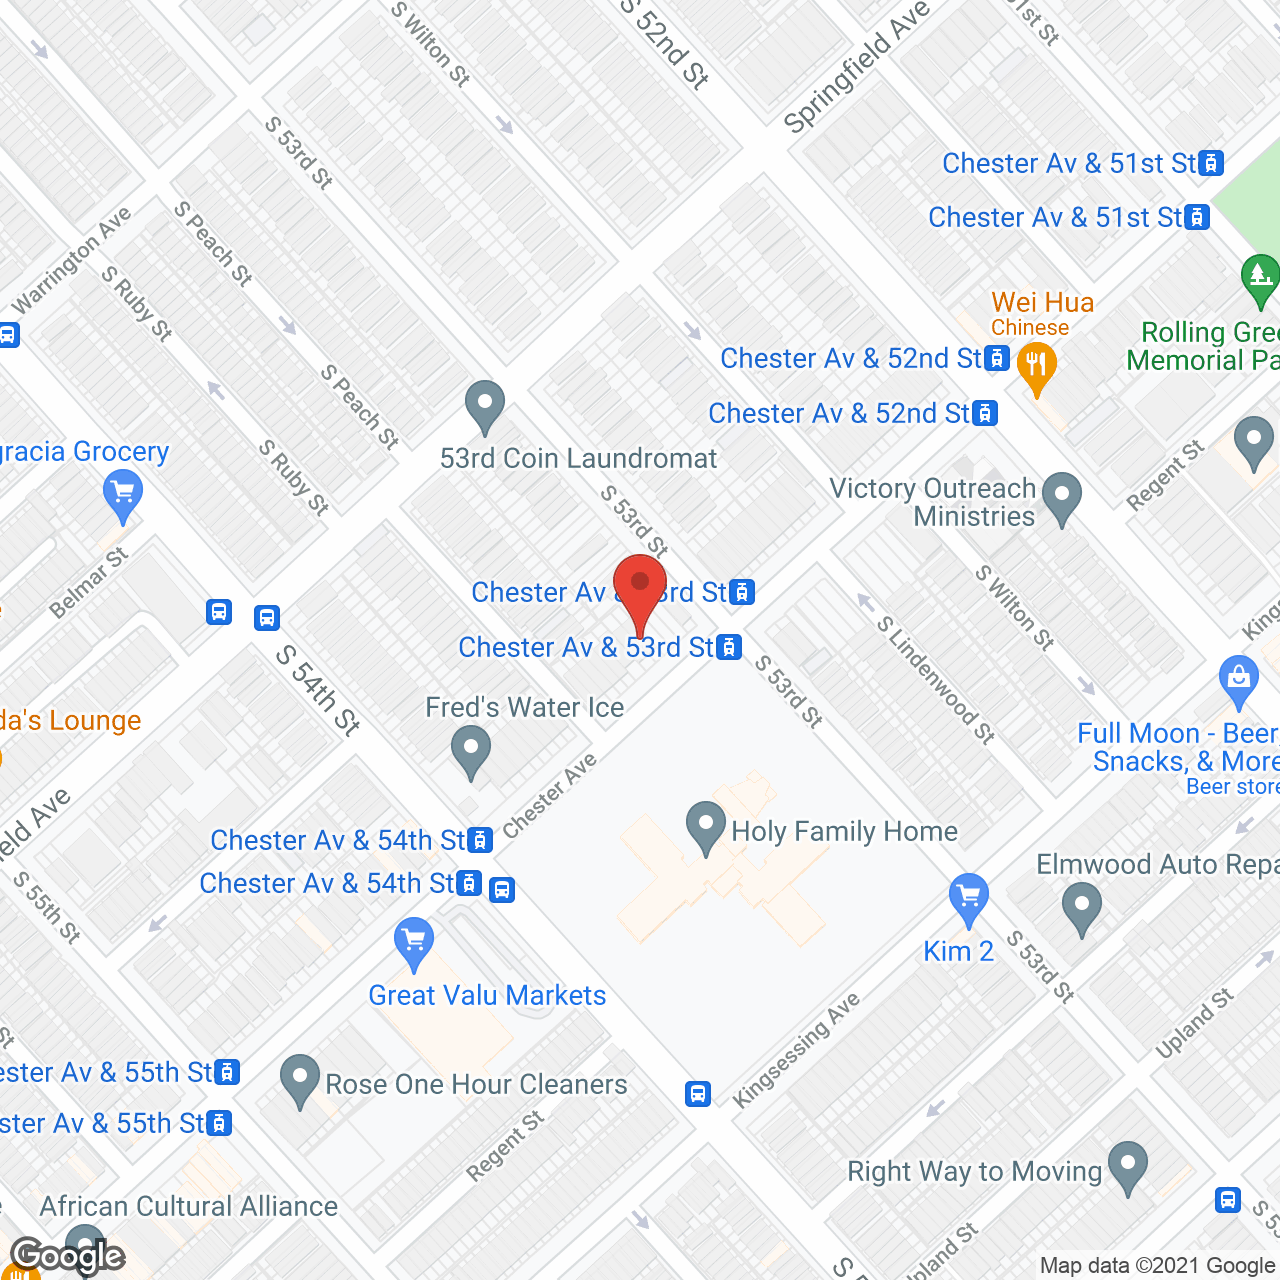 House of Friends in google map